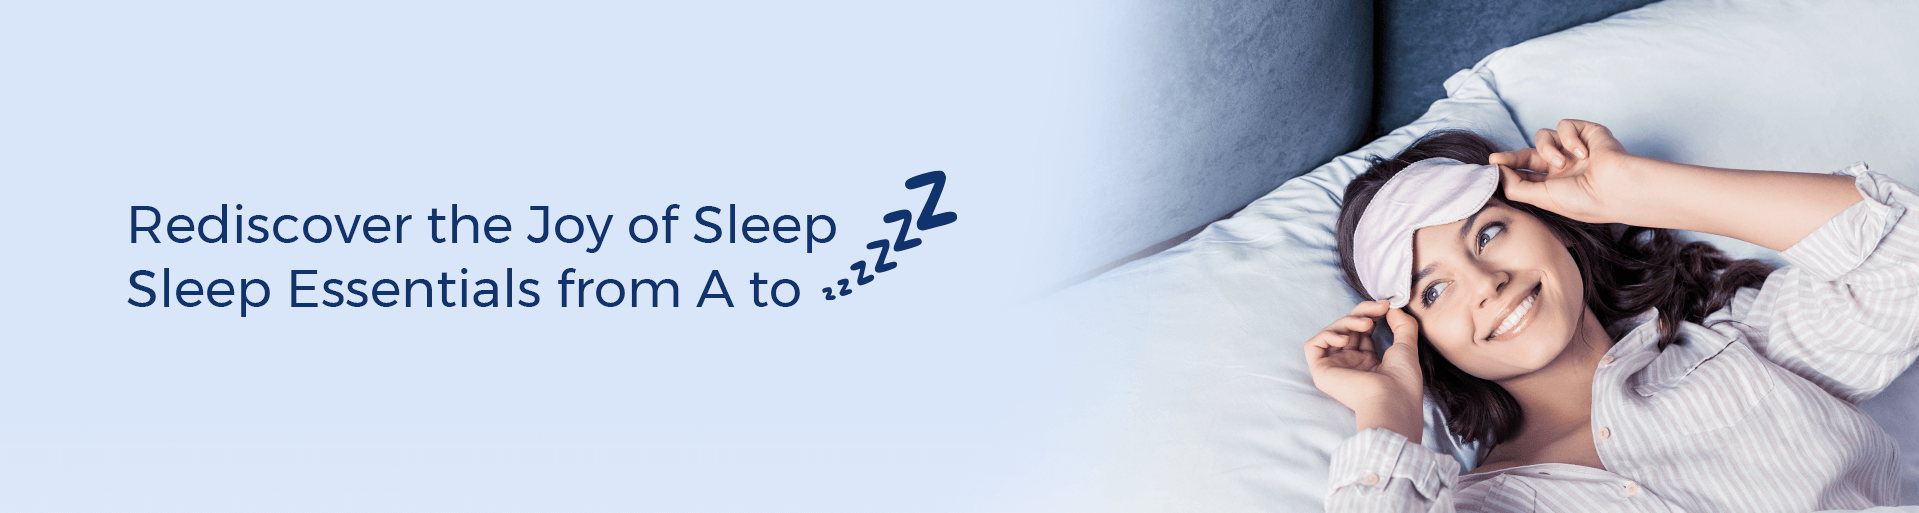 Sleep Essentials from A to Z